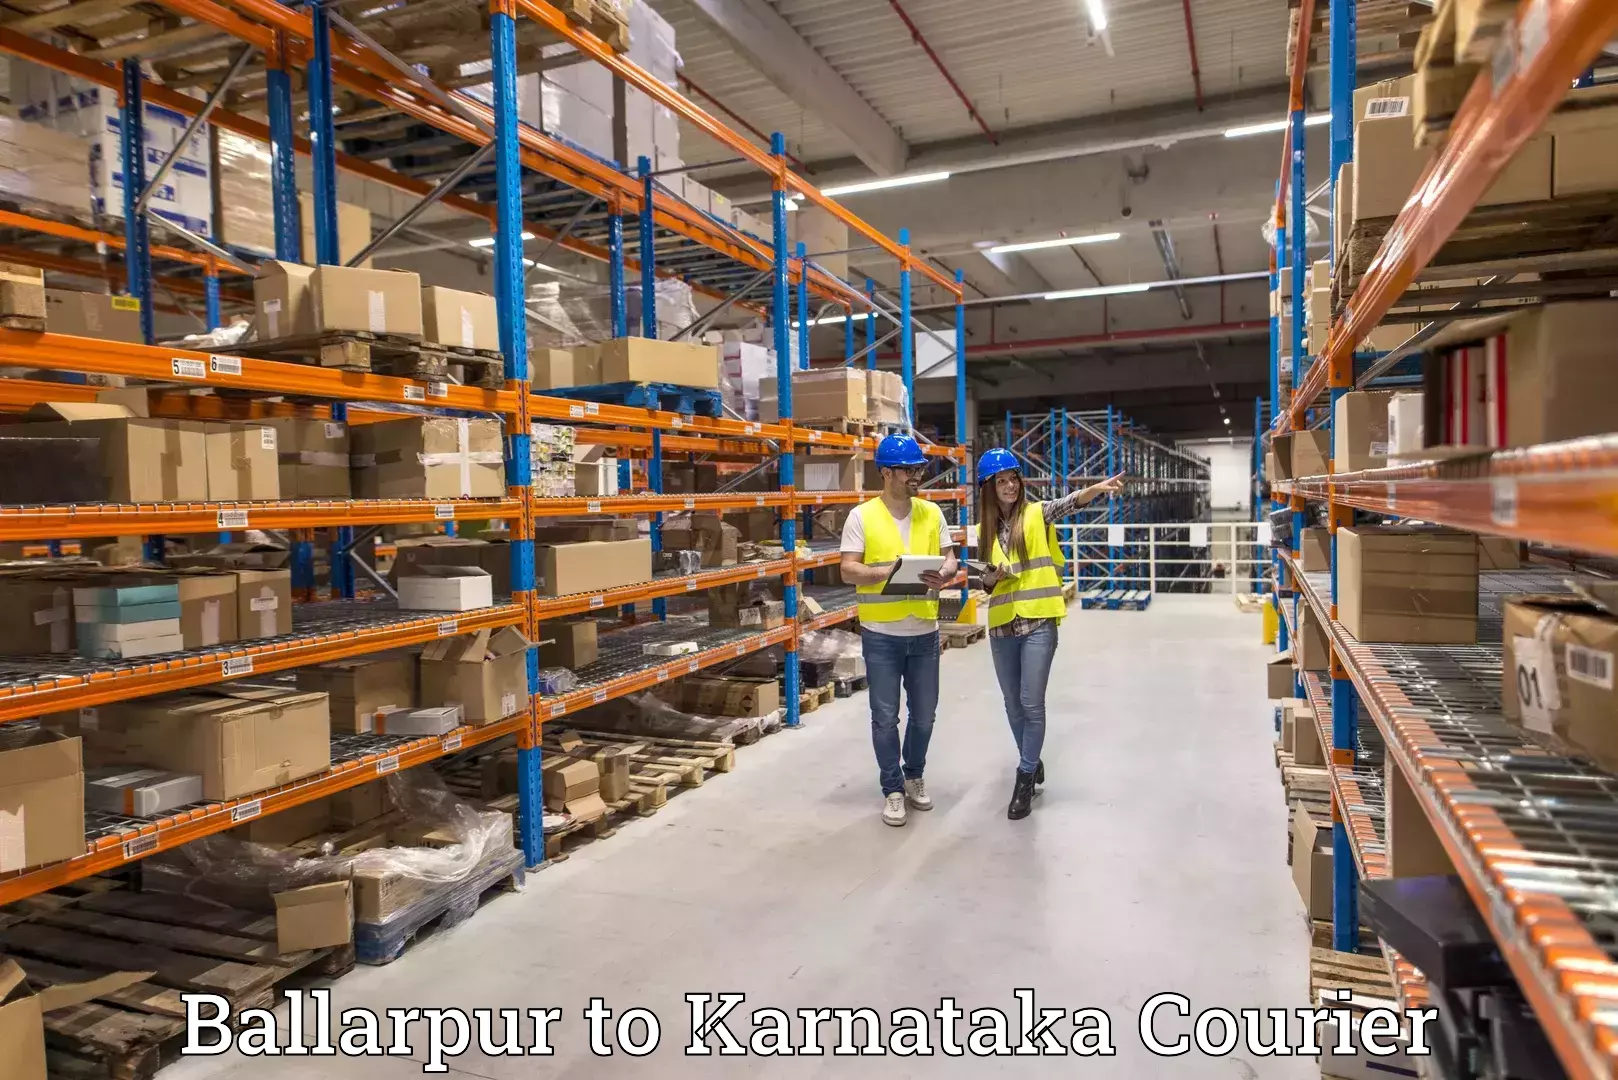 Express delivery network Ballarpur to Mangalore Port